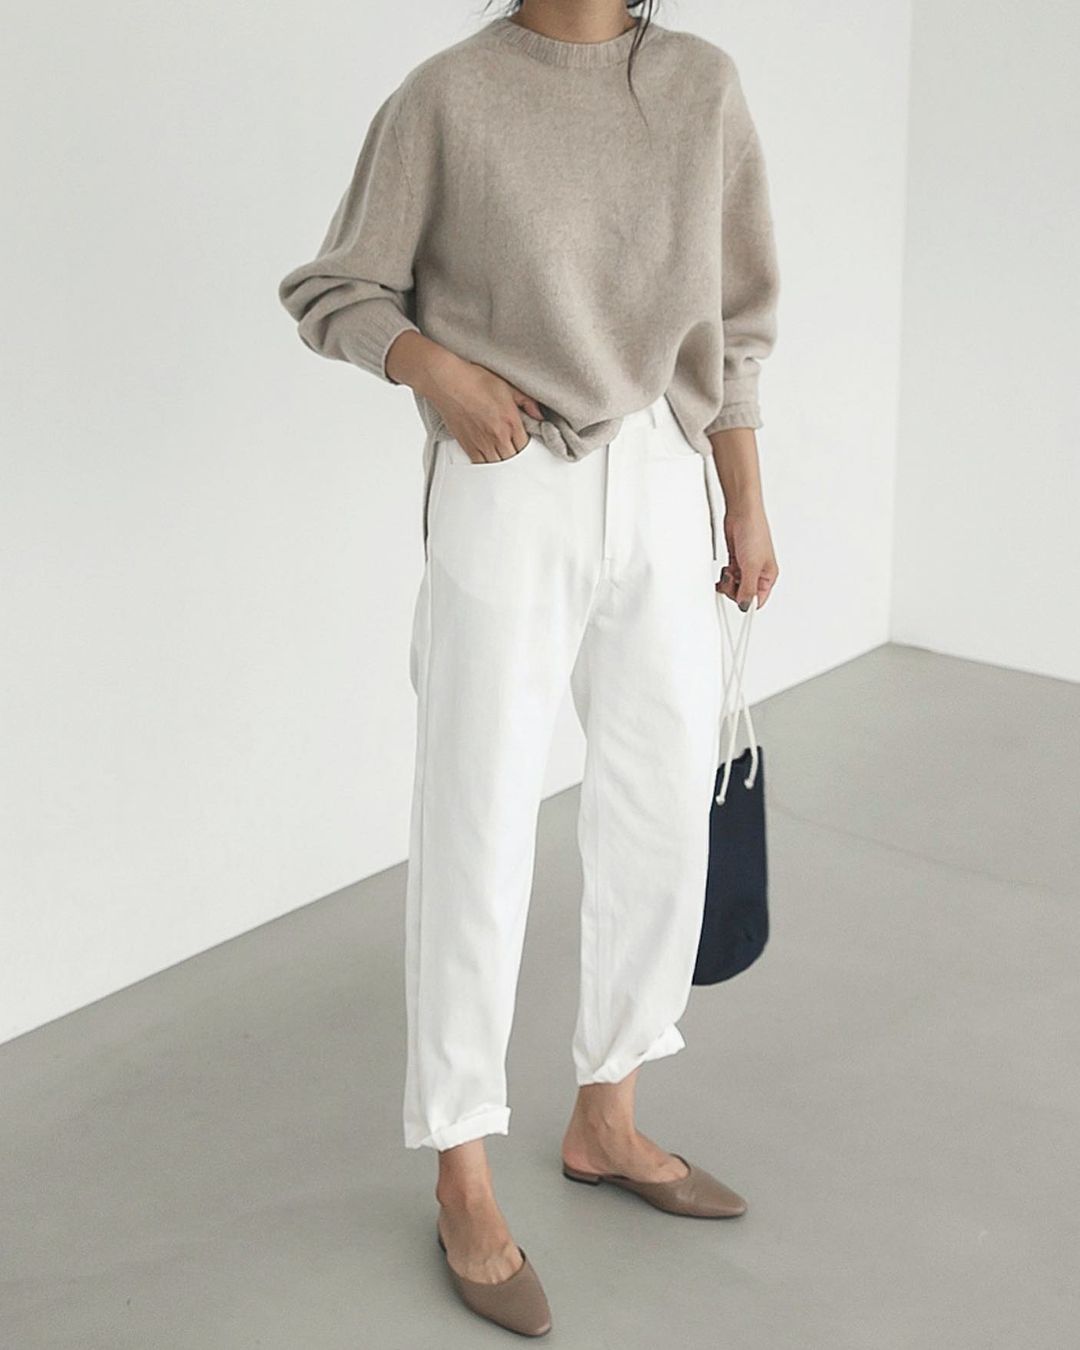 Stylish Fall Outfit Idea with Neutrals — Deathbyelocution Instagram Style with Beige Sweater, White Jeans, and Taupe Mule Flats